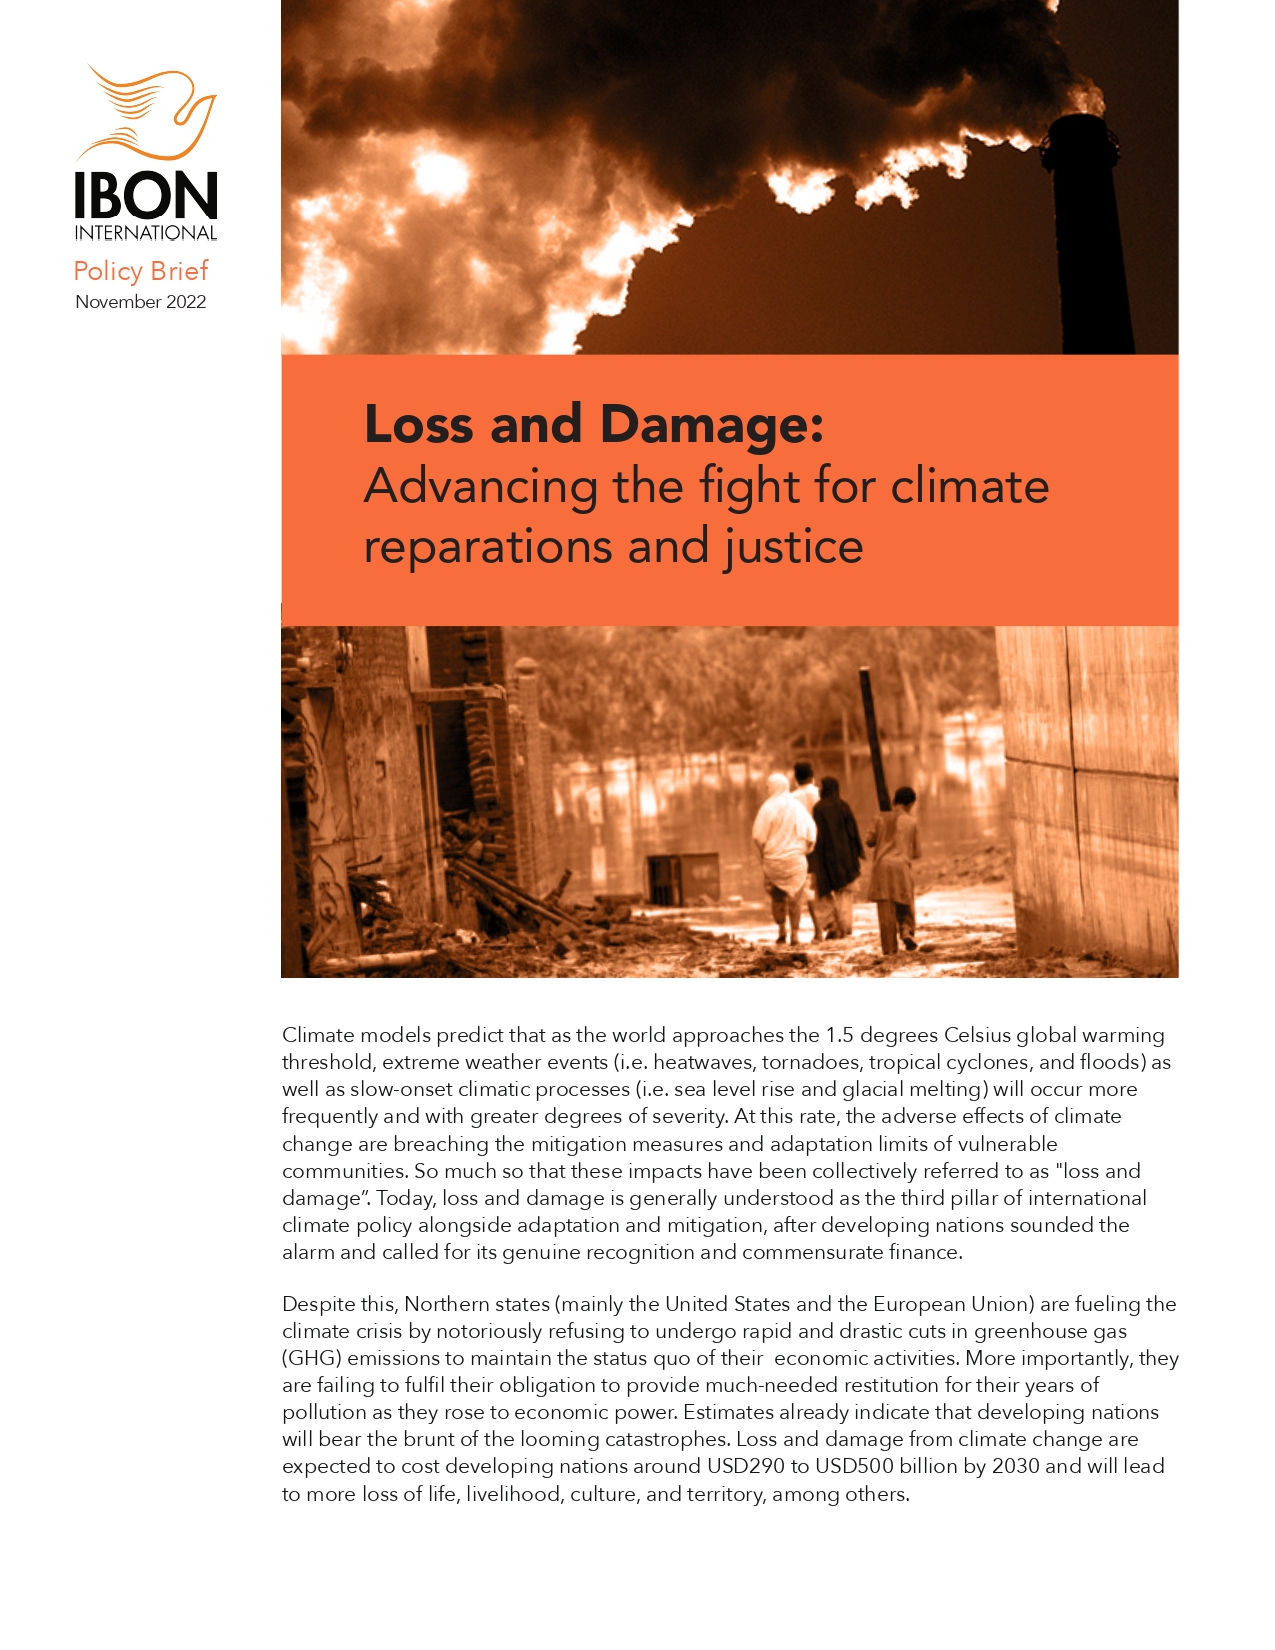 Loss and Damage: Advancing the fight for climate reparations and justice